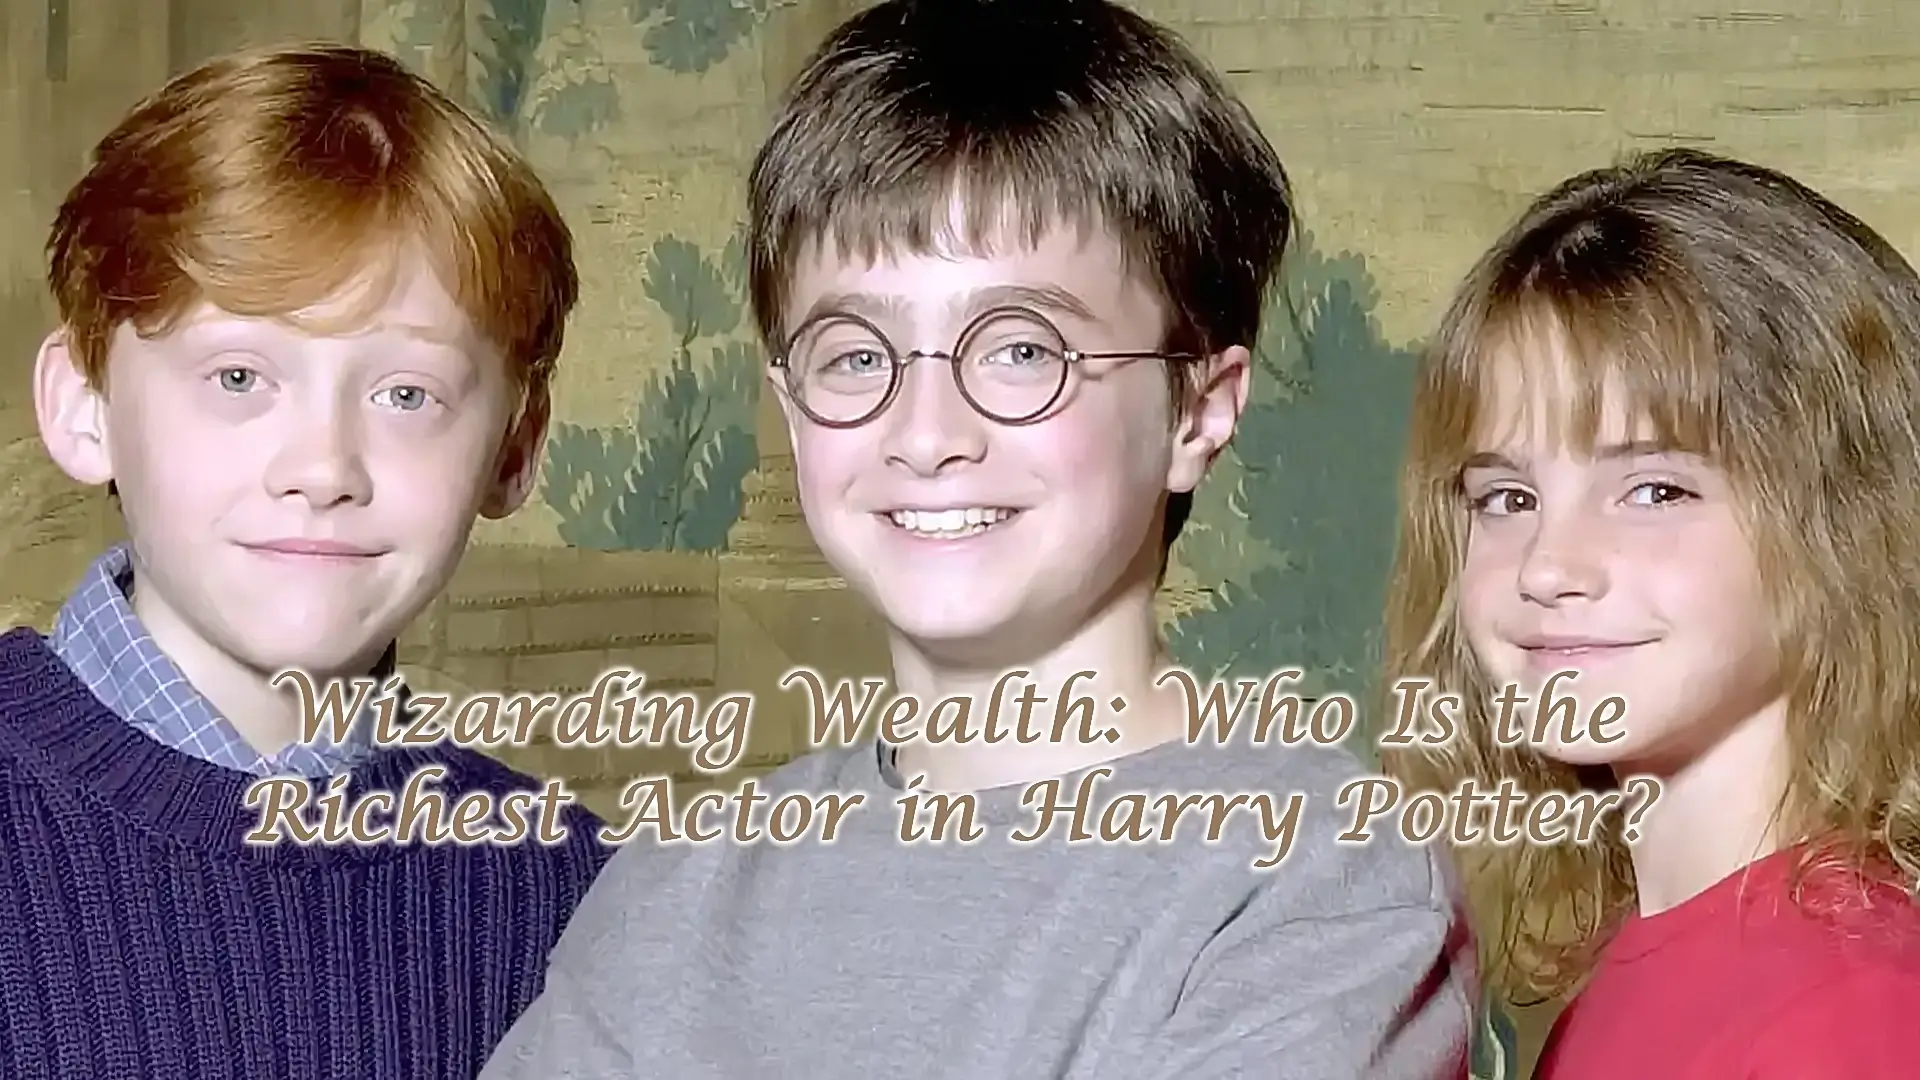 Wizarding Wealth: Who Is the Richest Actor in Harry Potter?